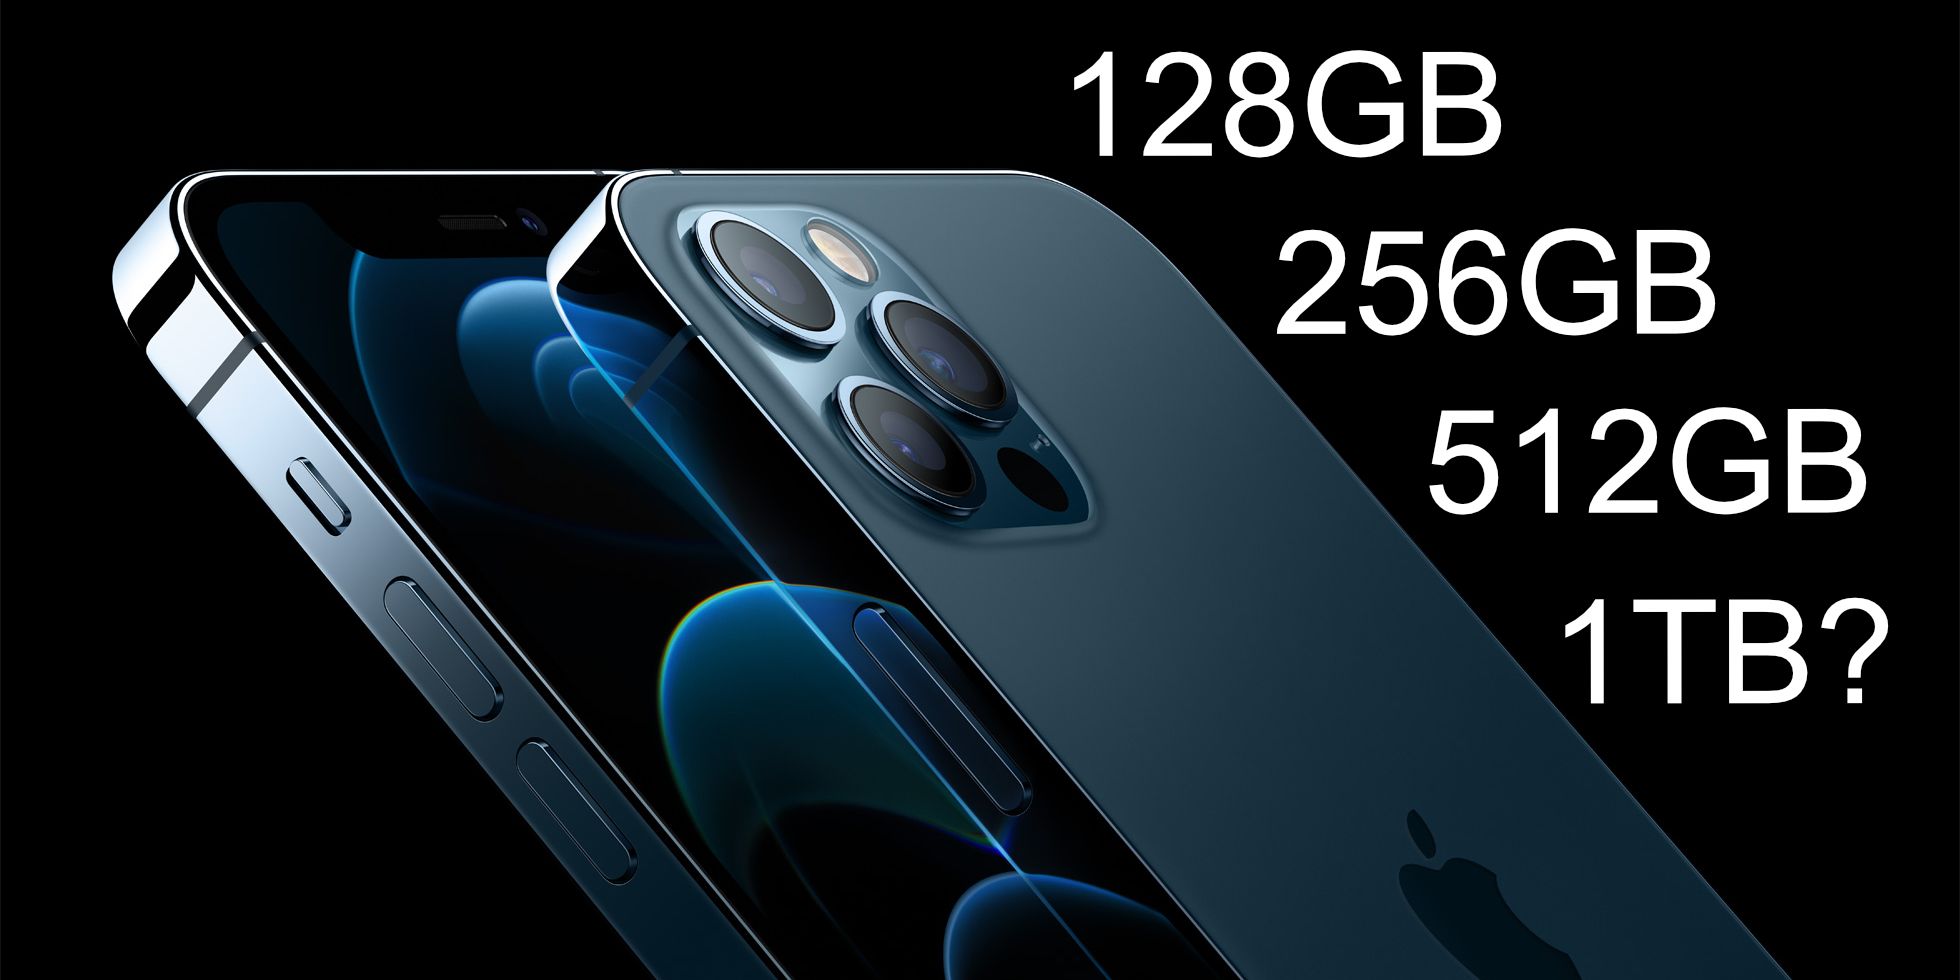 iPhone render with rumored storage options for iPhone 13